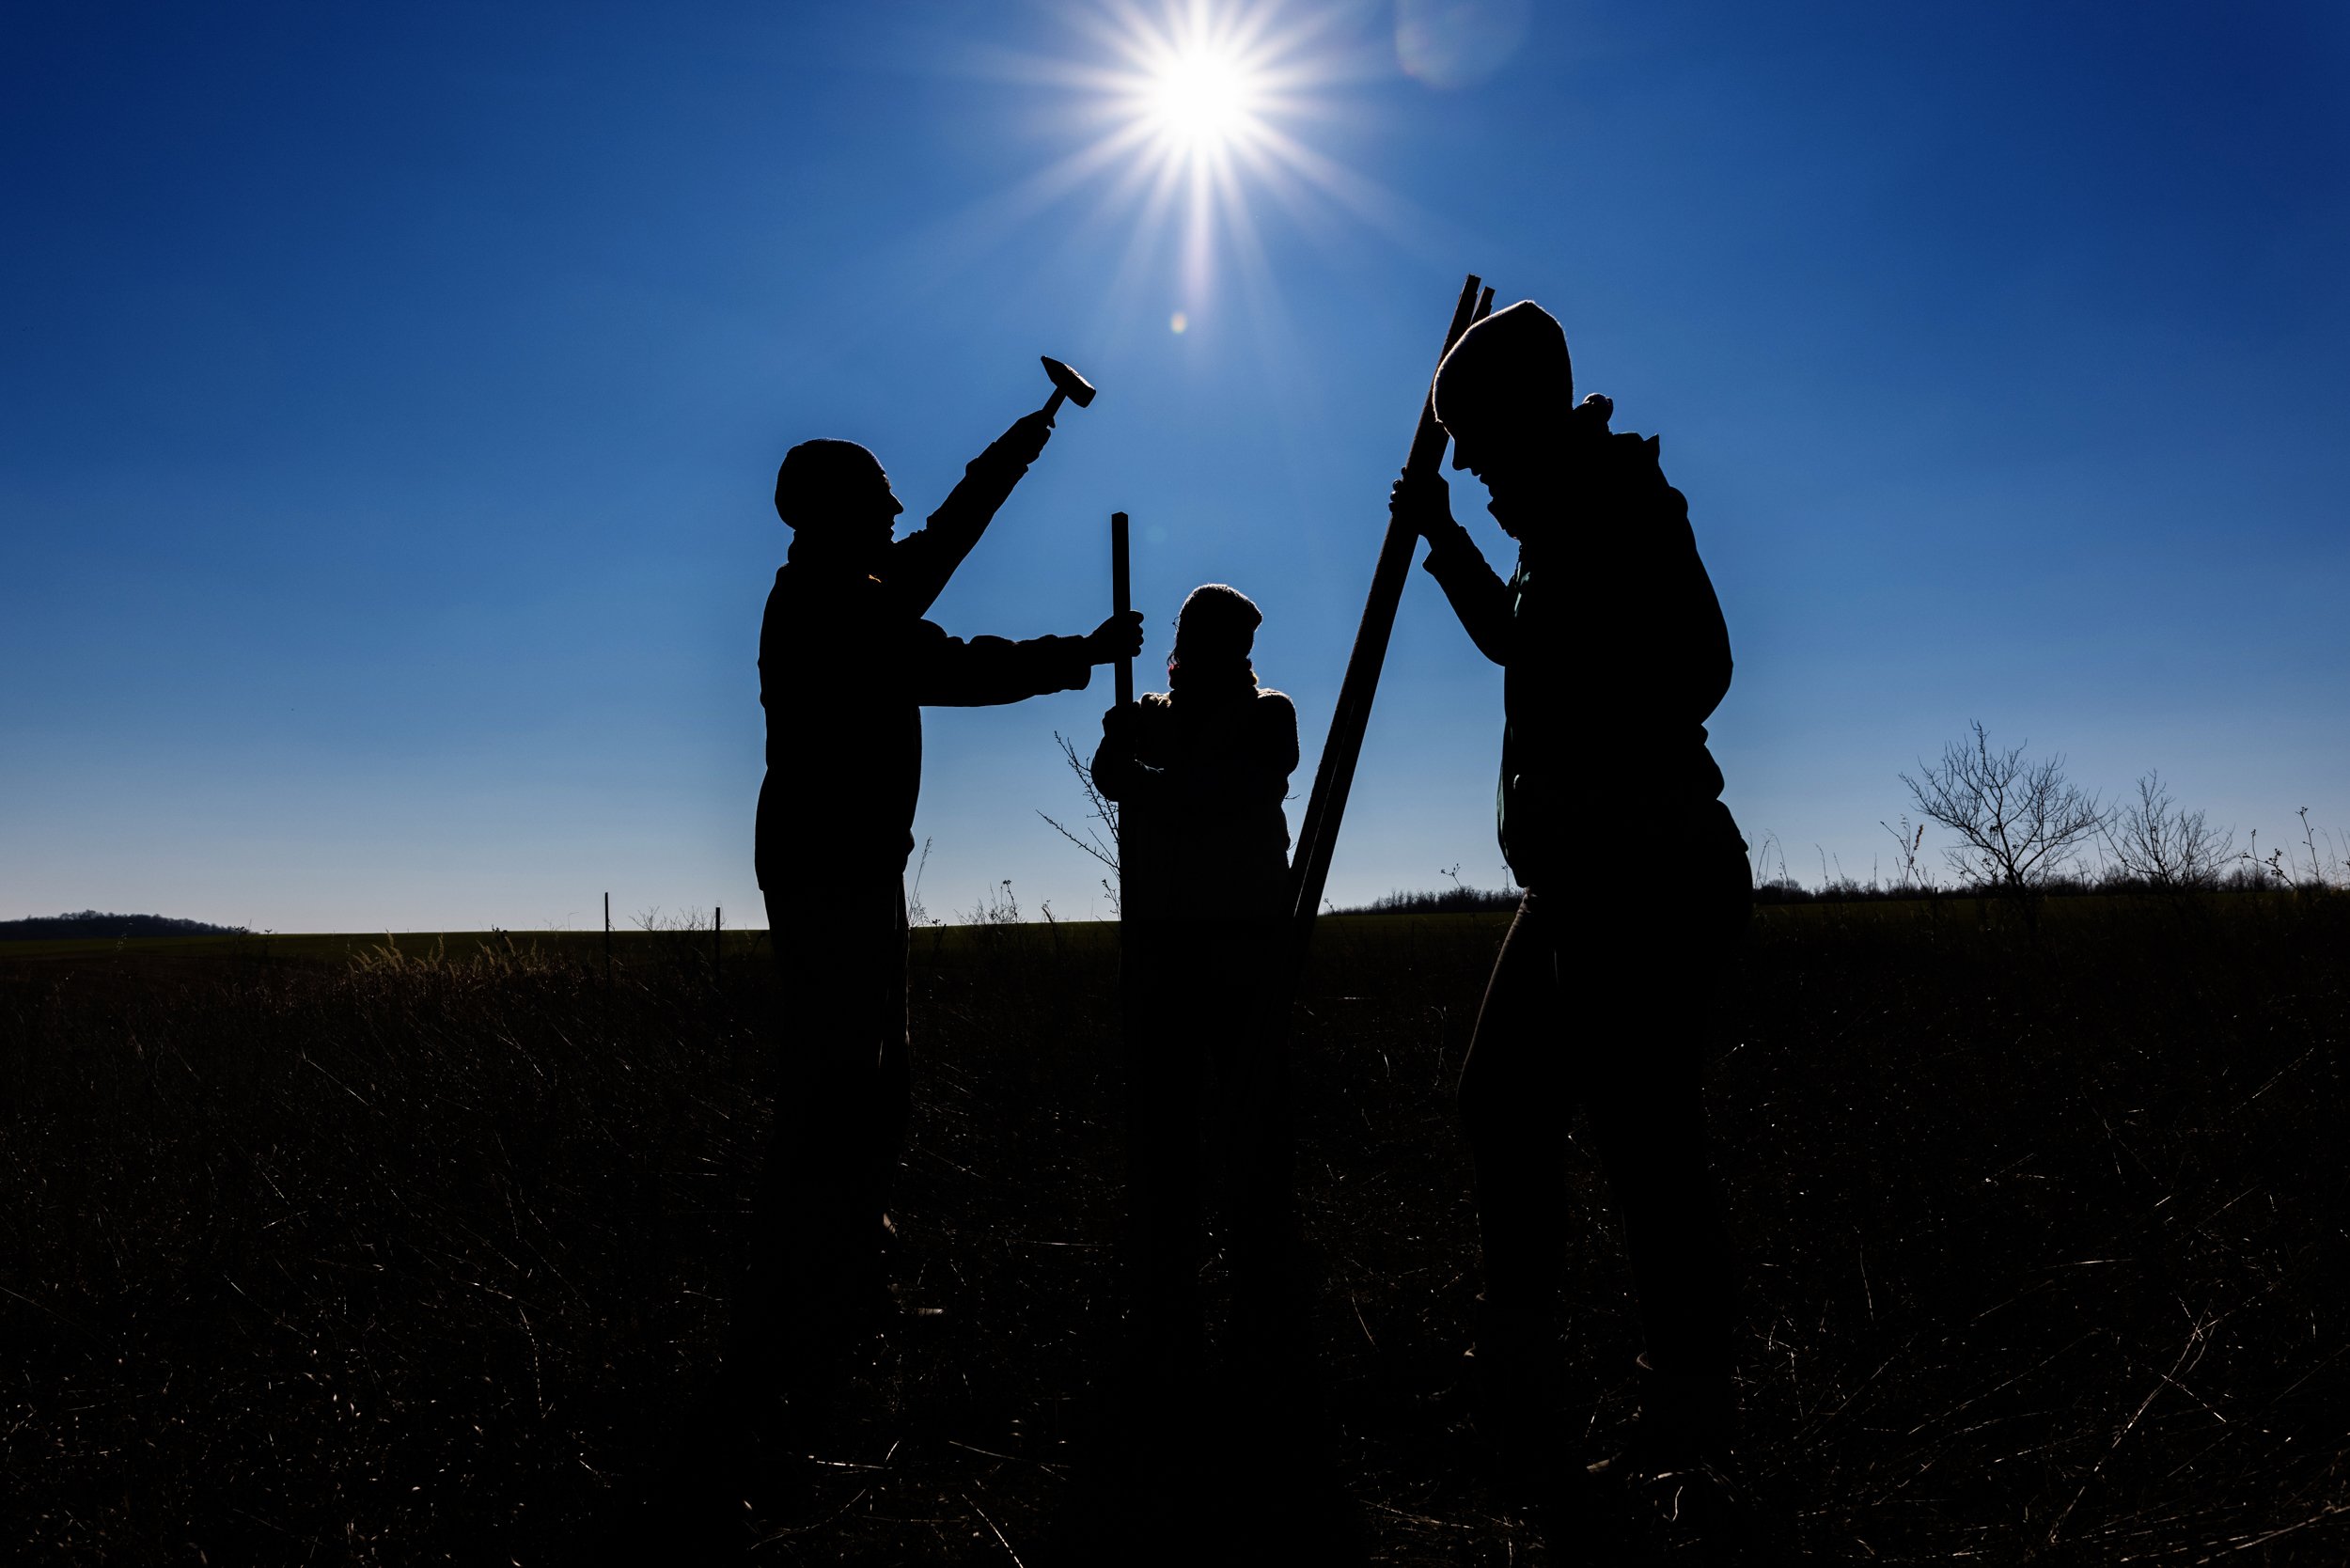  Three members of the Nyim Eco Community marking the locations of the future trees on the Eco-meadow on the outskirts of Nyim on March 13, 2022. The group planted 1,200 trees – forest saplings and landrace fruit trees – during the last season, from a